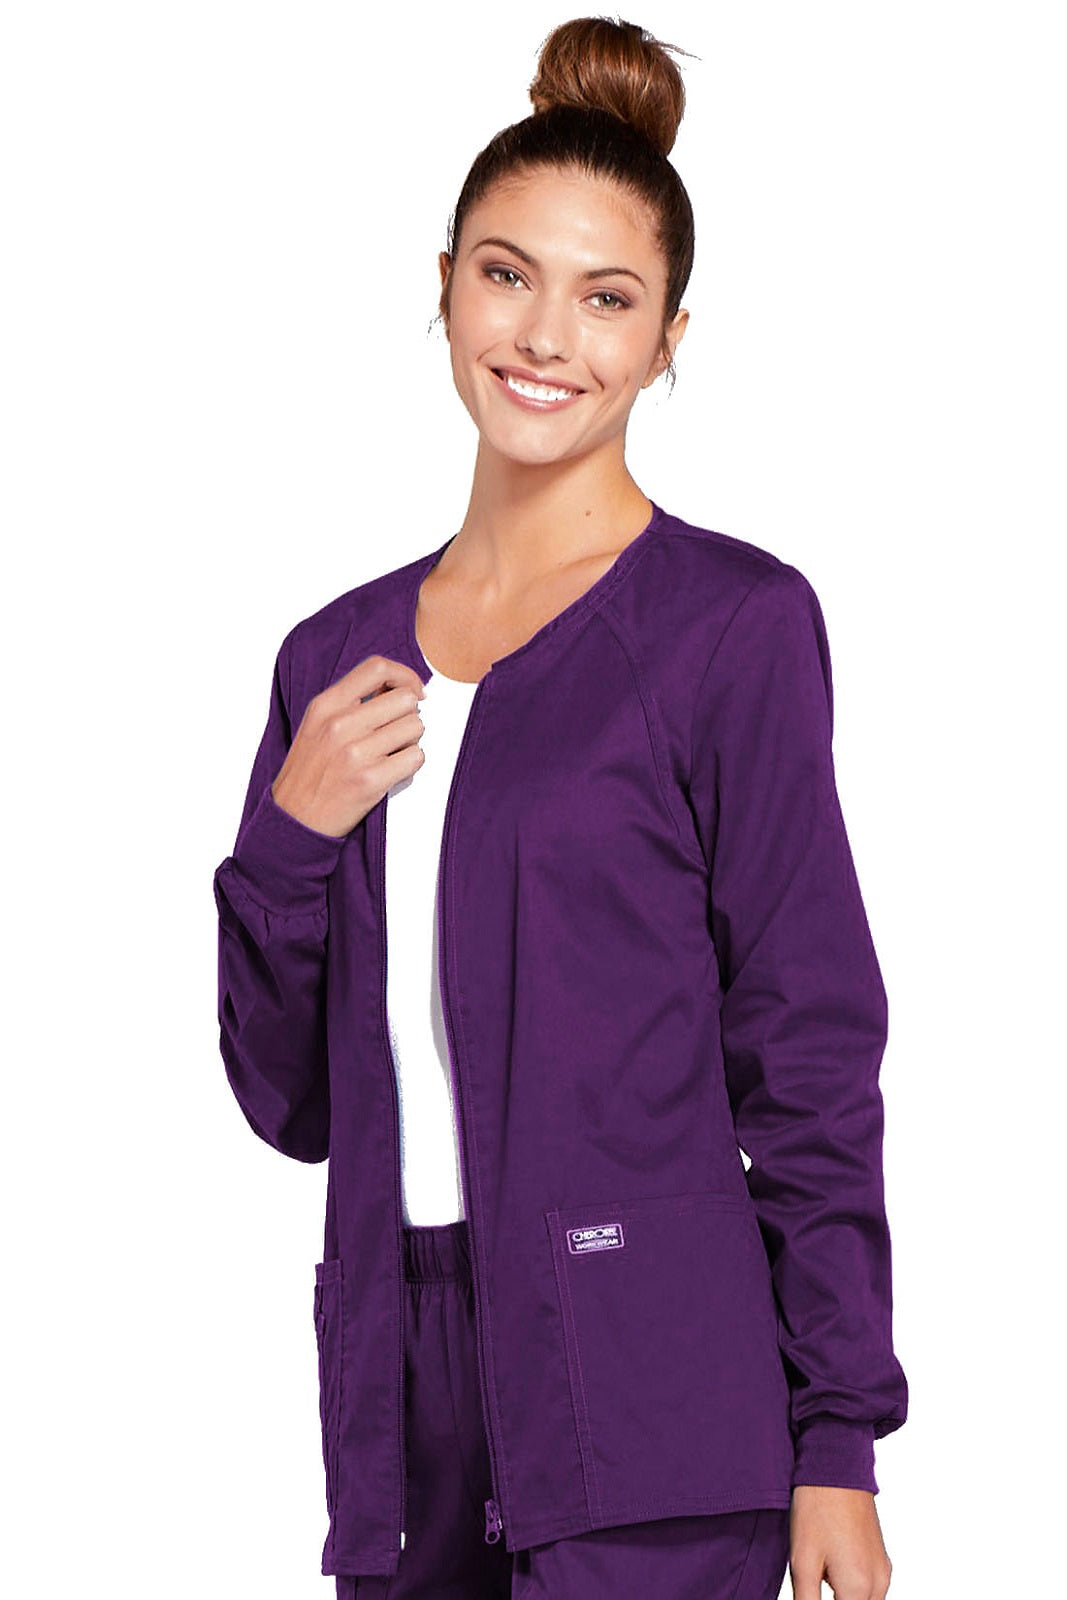 Cherokee Core Stretch Scrub Jacket Zip Front 4315 in Eggplant at Parker's Clothing and Shoes.